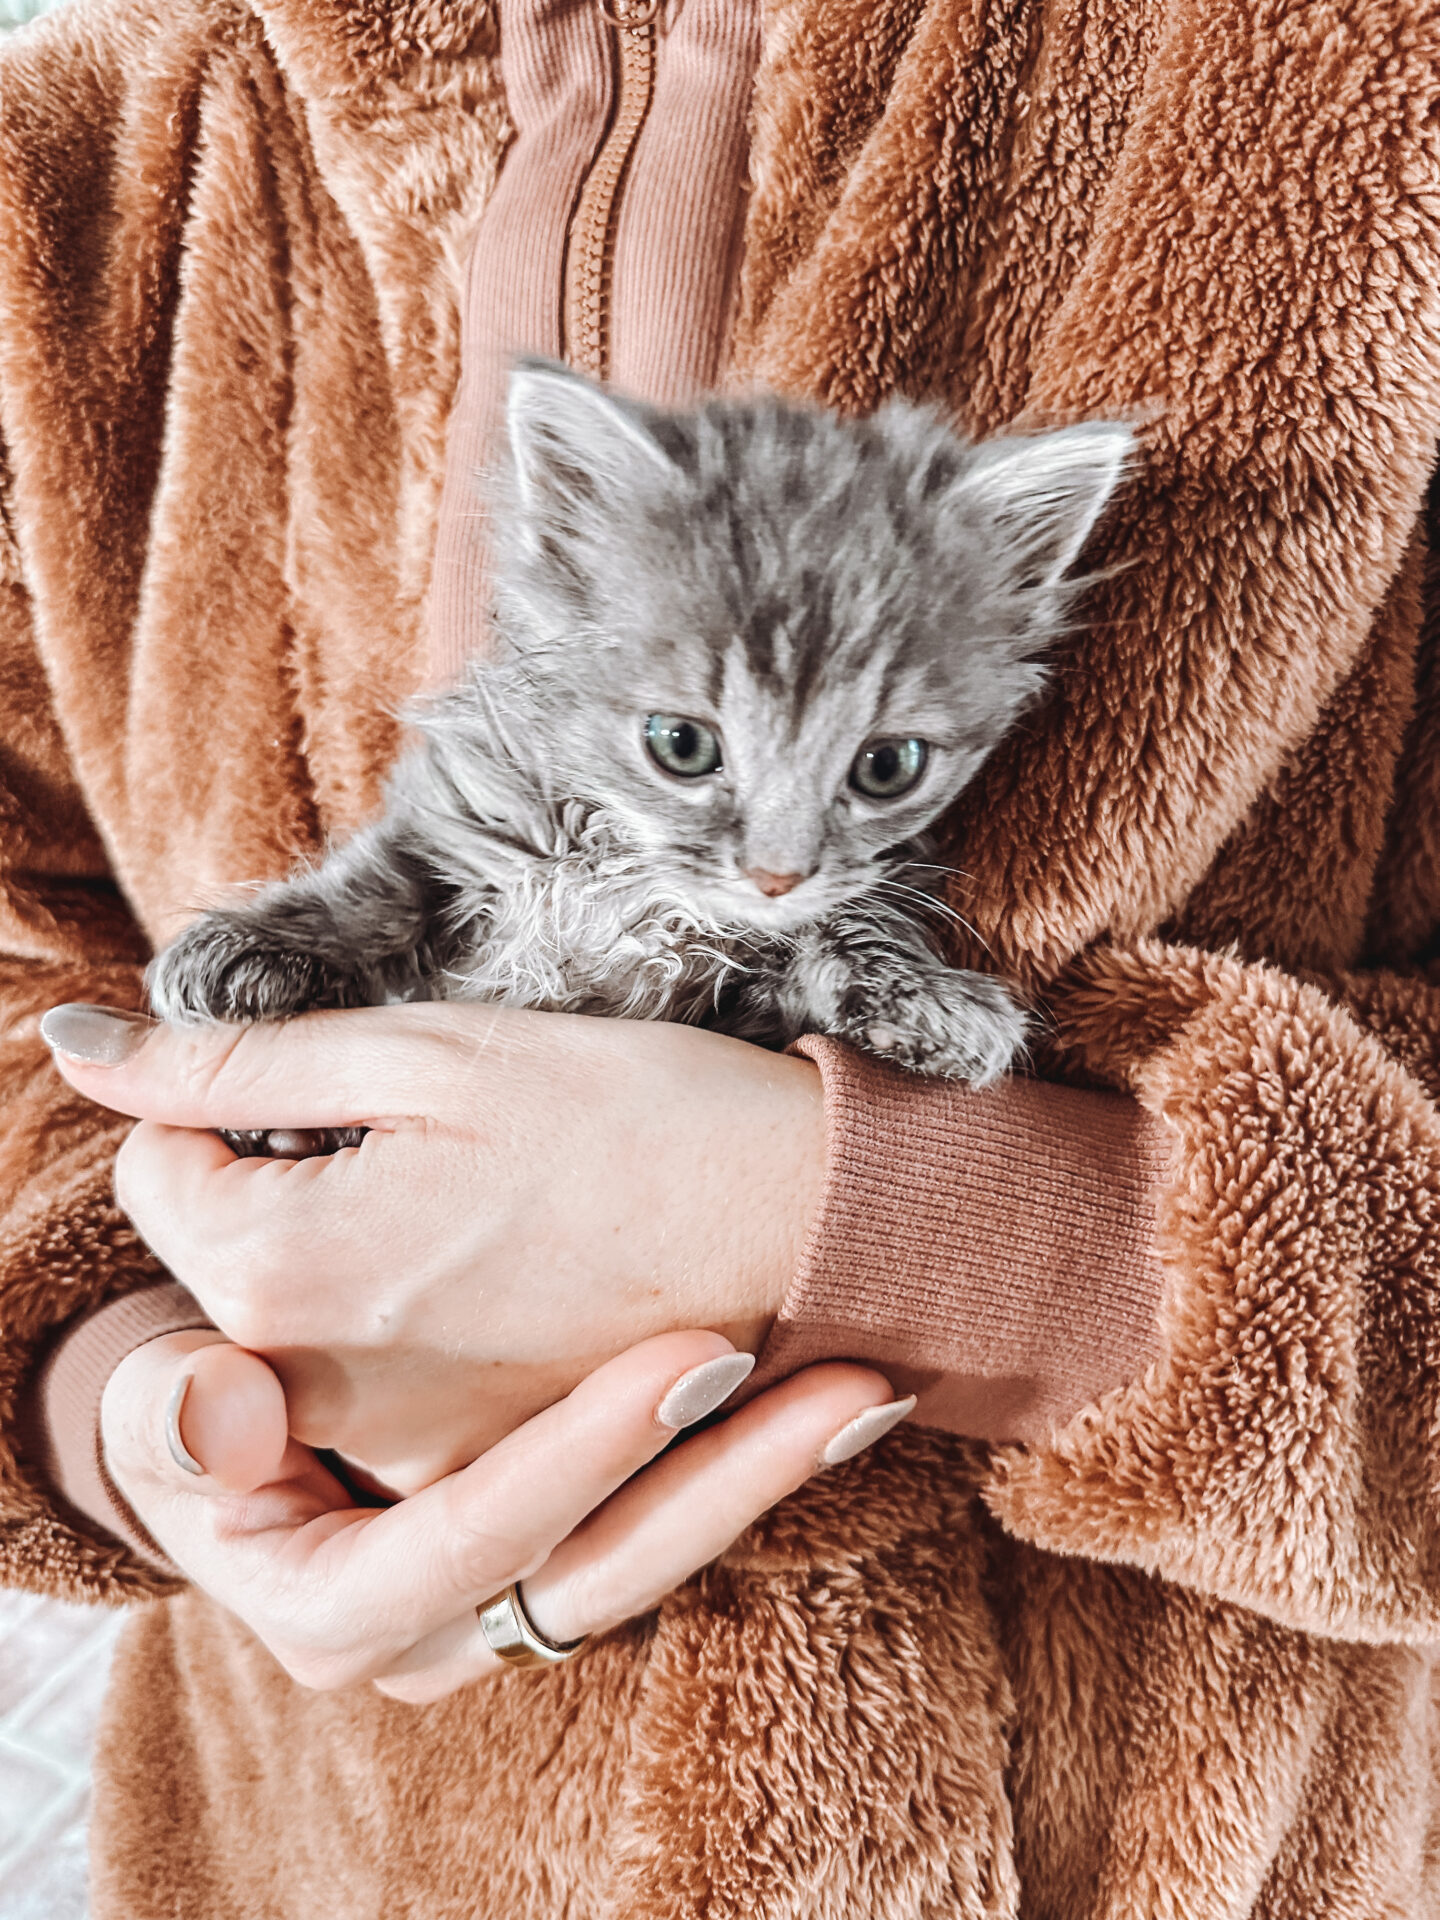 How to take care of a 4 week old kitten by lifestyle blogger Angela Lanter